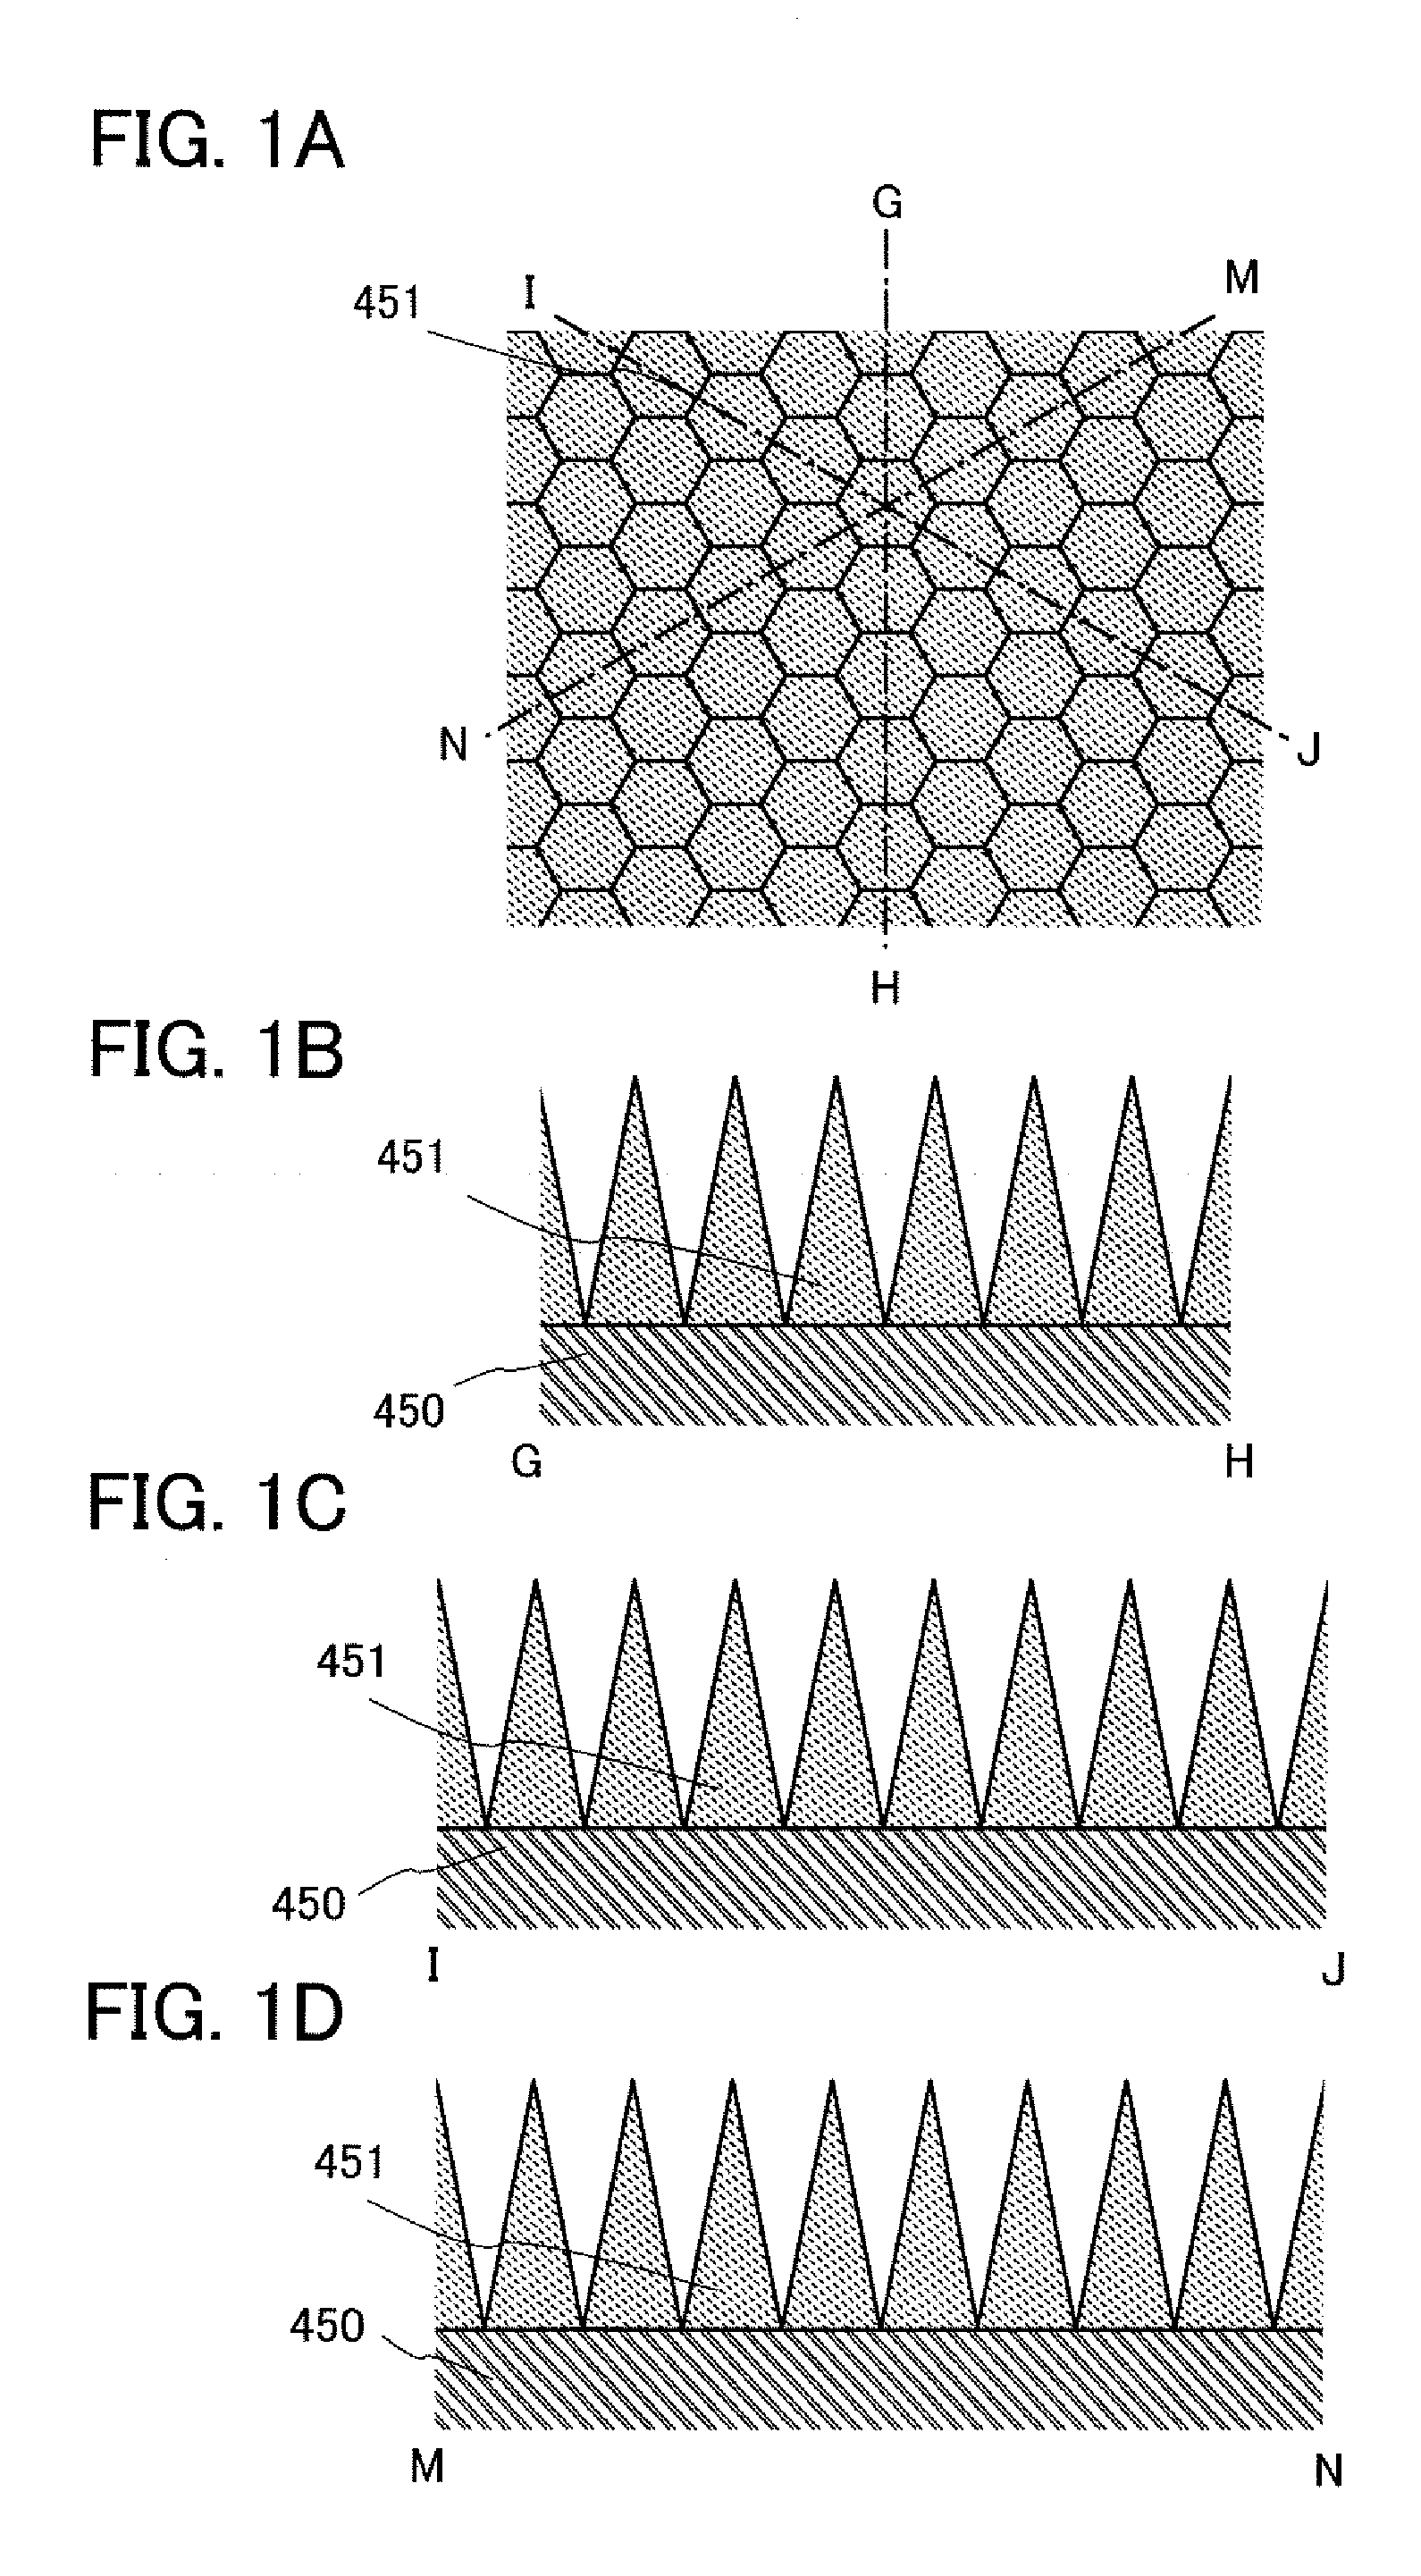 Anti-reflection film and display device